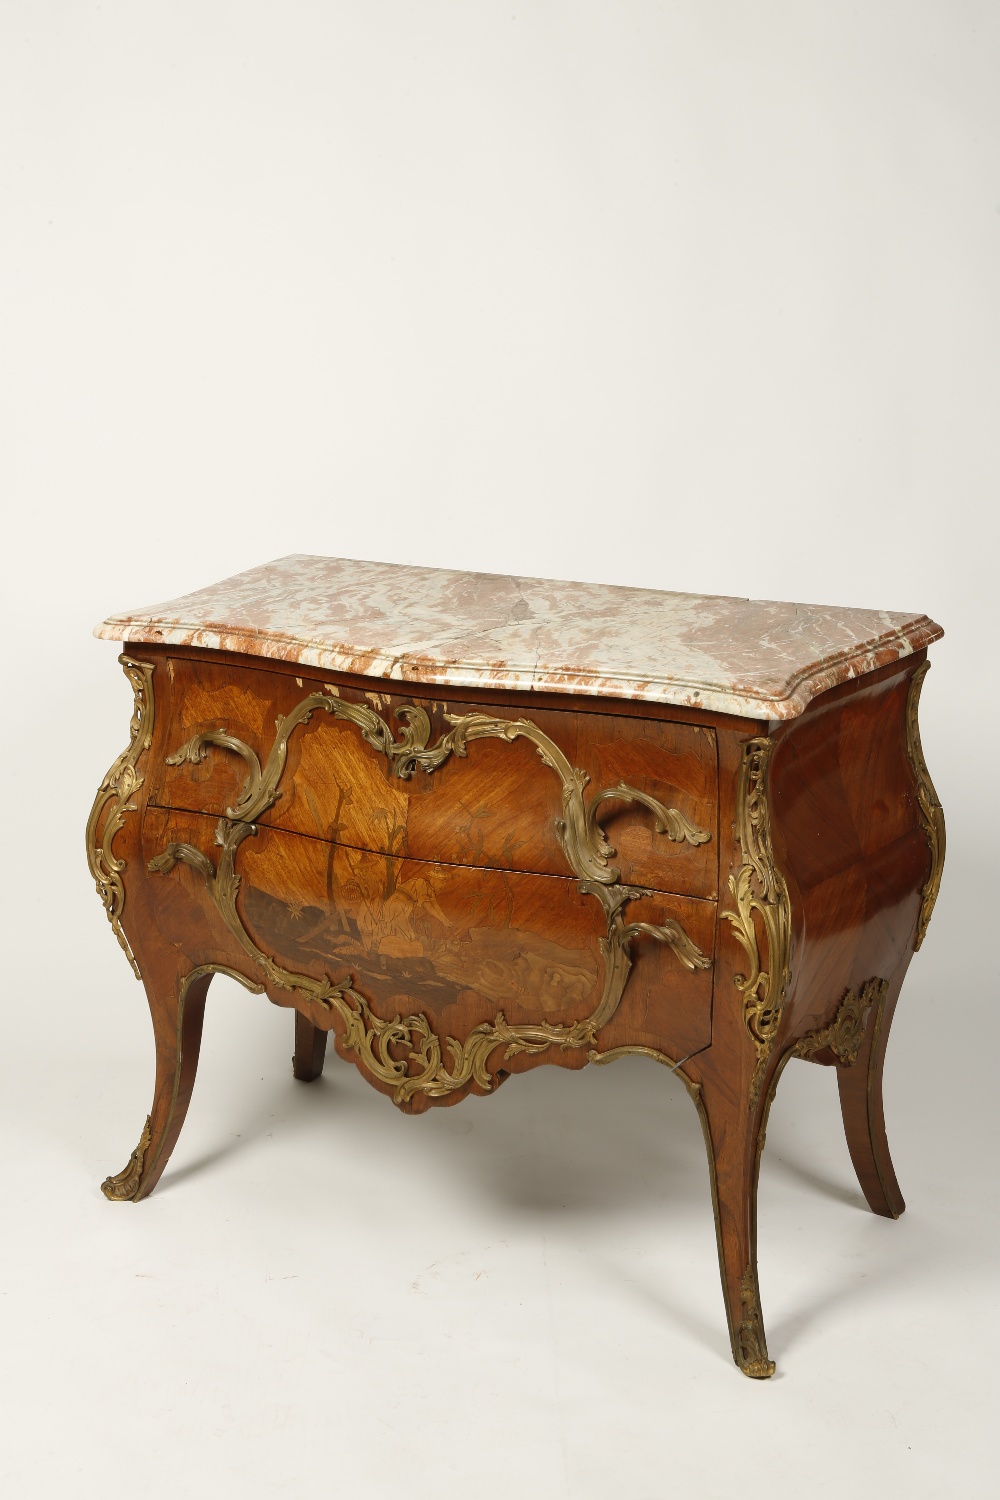 A LOUIS XV KINGWOOD AND MARQUETRY COMMODE with a serpentine fronted marble top above a bombe and